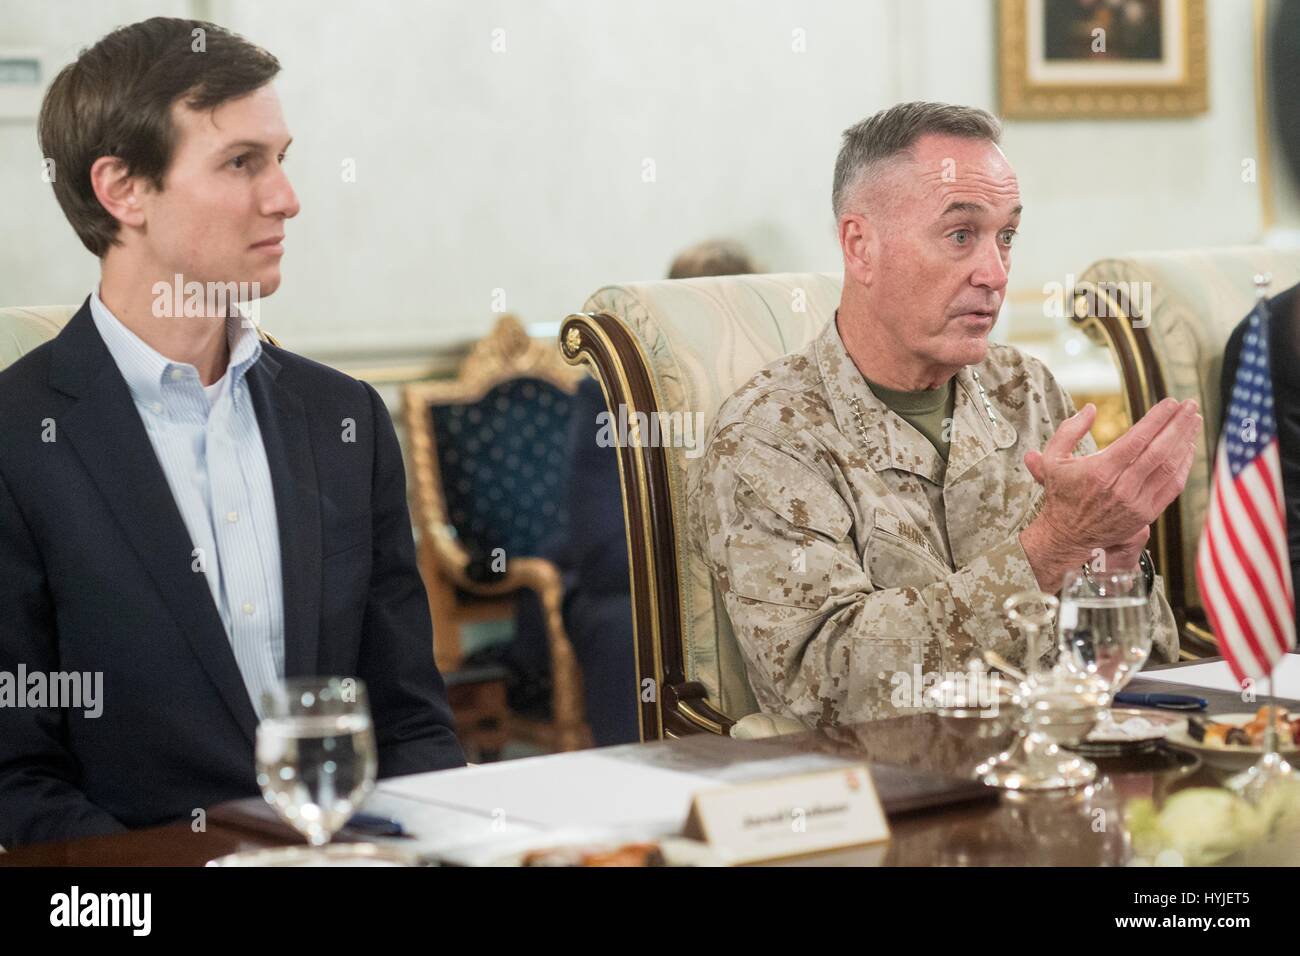 Erbil, Iraq. 04th Apr, 2017. U.S. Joint Chiefs Chairman Gen. Joseph Dunford, right, and Jared Kushner, Senior Advisor and son-in-law to President Trump meet with the President of Iraqi Kurdistan Masoud Barzan April 4, 2017 near Erbil, Iraq. Dunford, and Kushner are on a fact finding mission to Iraq to view the progress to recapture Mosul from the Islamic State. Credit: Planetpix/Alamy Live News Stock Photo